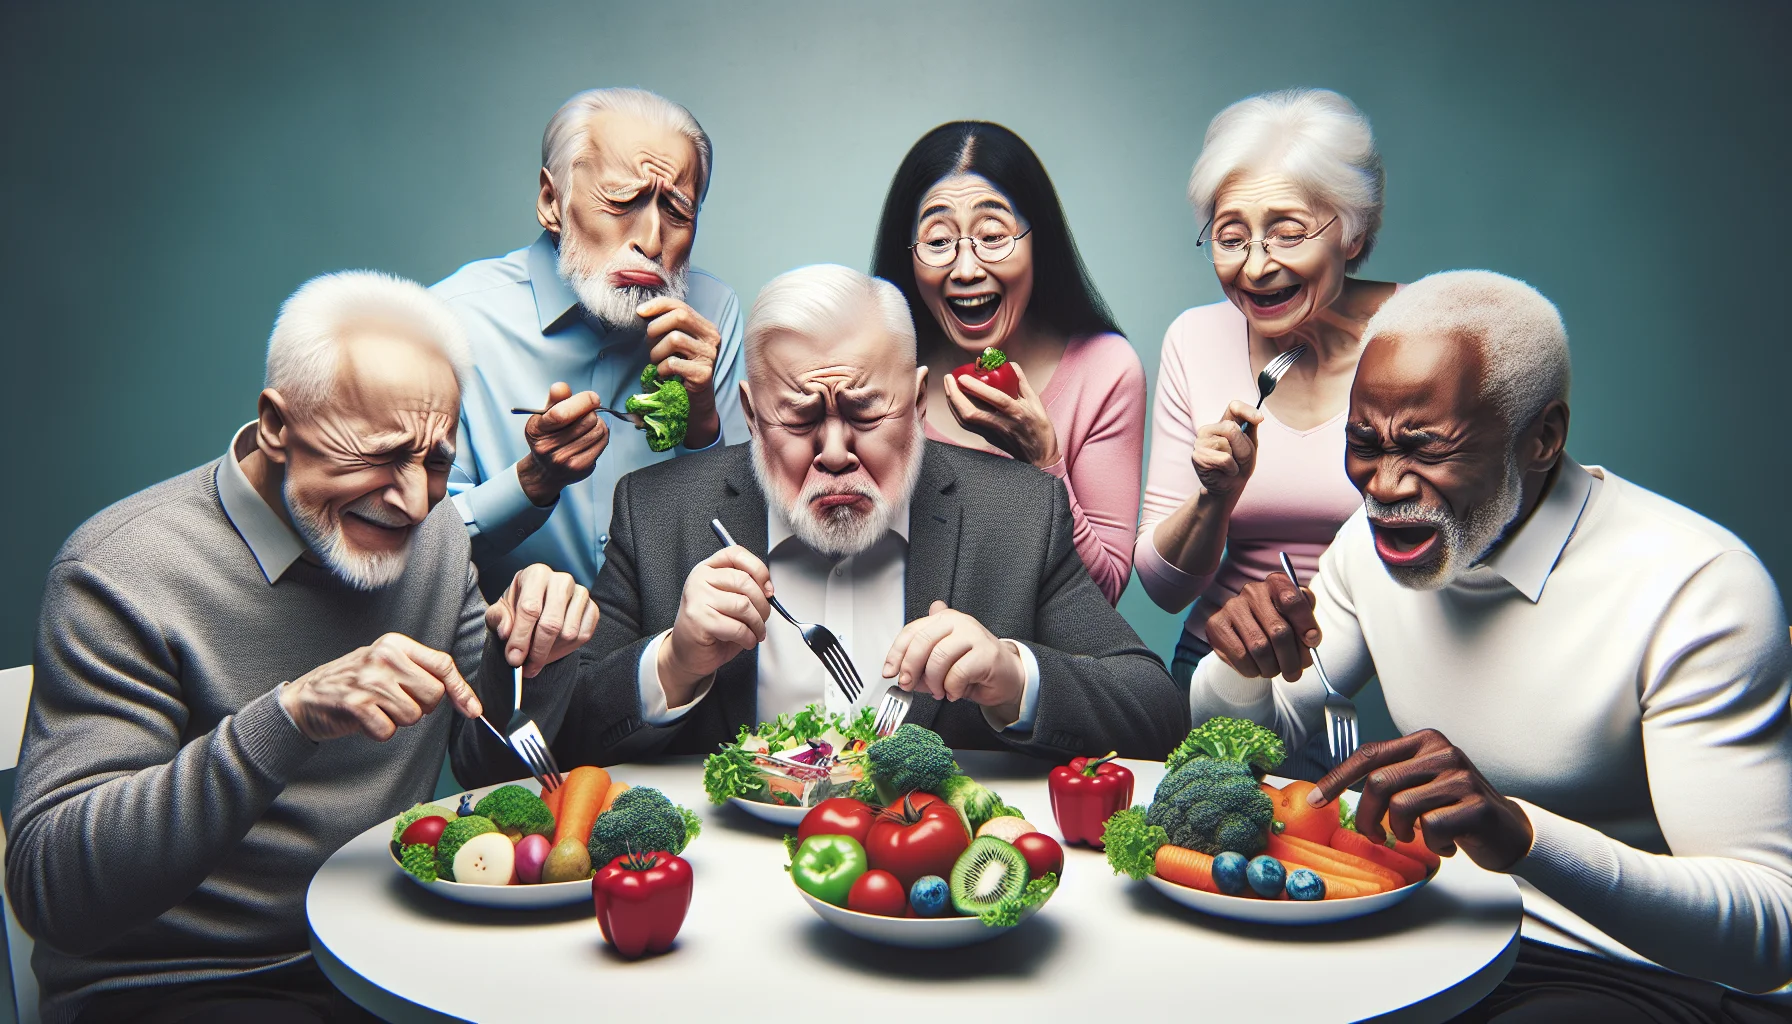 Craft an amusing and realistic image of a group of senior citizens embarking on their health journeys post a heart attack. Have them sitting around a round table, each holding a plate of colorful, nutritious foods. A Caucasian man might be squinting at a broccoli, South Asian woman may be cheerfully crunching a carrot, a black gentleman is digging into a vibrant salad, and a Hispanic lady is taking a playful bite of whole grain bread. Show their expressions reflecting surprise, enjoyment, and mild confusion over their new eating habit. Keep the ambiance light-hearted, hinting towards the humorous side of this drastic lifestyle change.